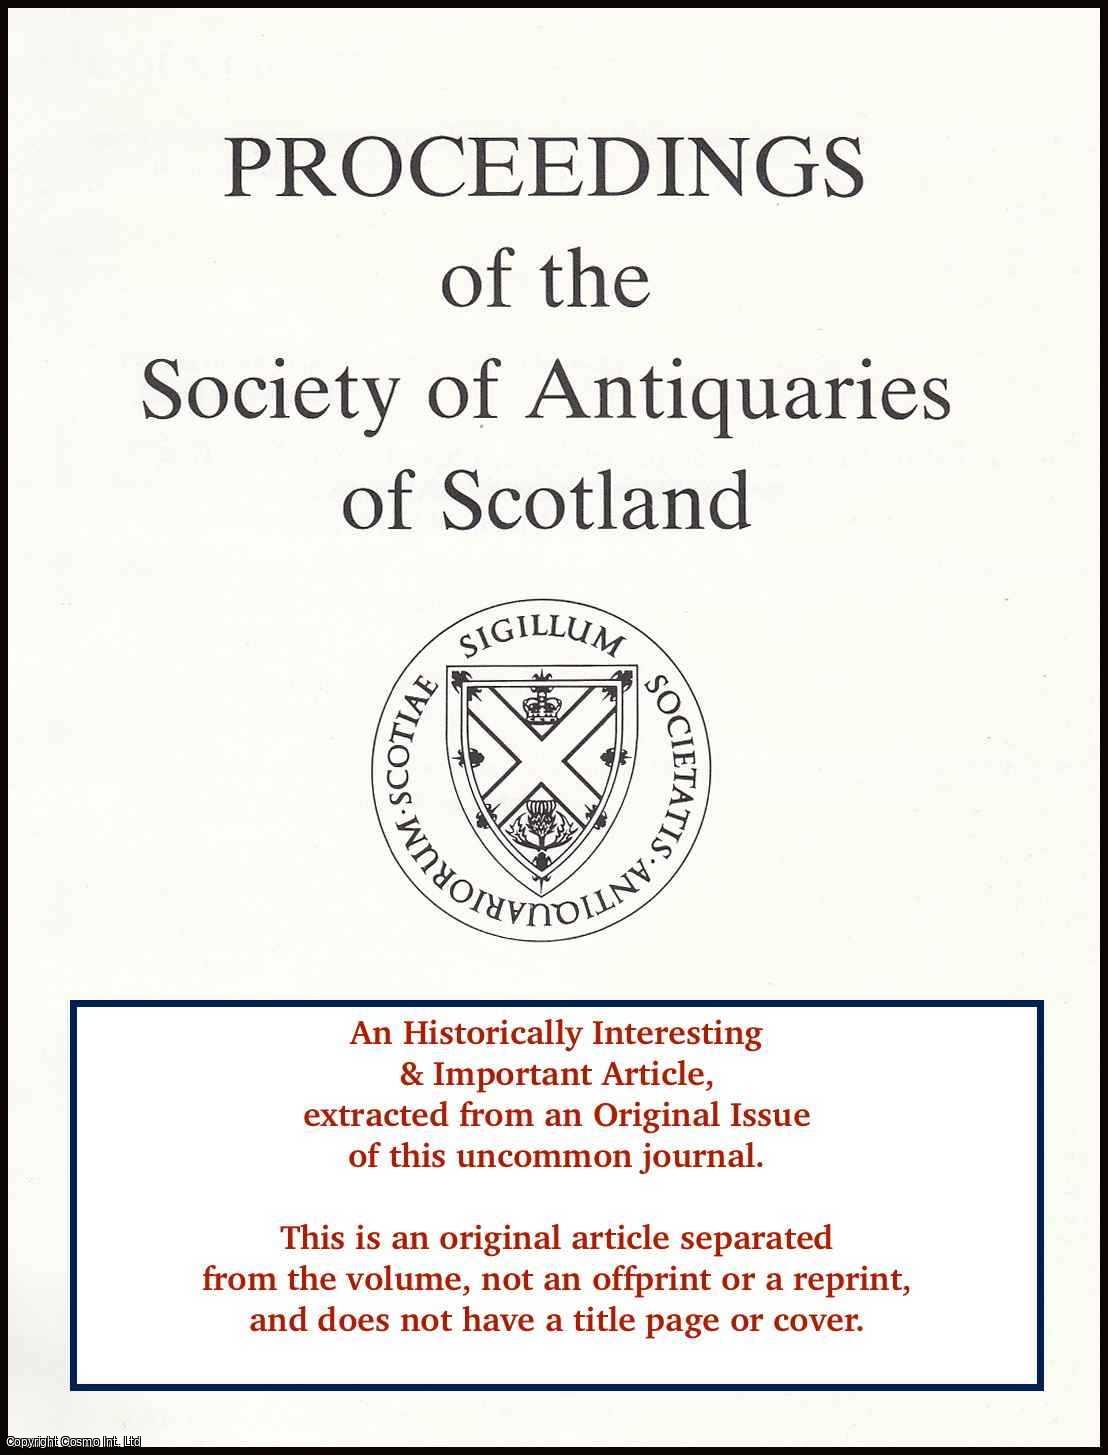 J.T. Lang - Hogback Monuments in Scotland. An original article from the Proceedings of the Society of Antiquaries of Scotland, 1974.